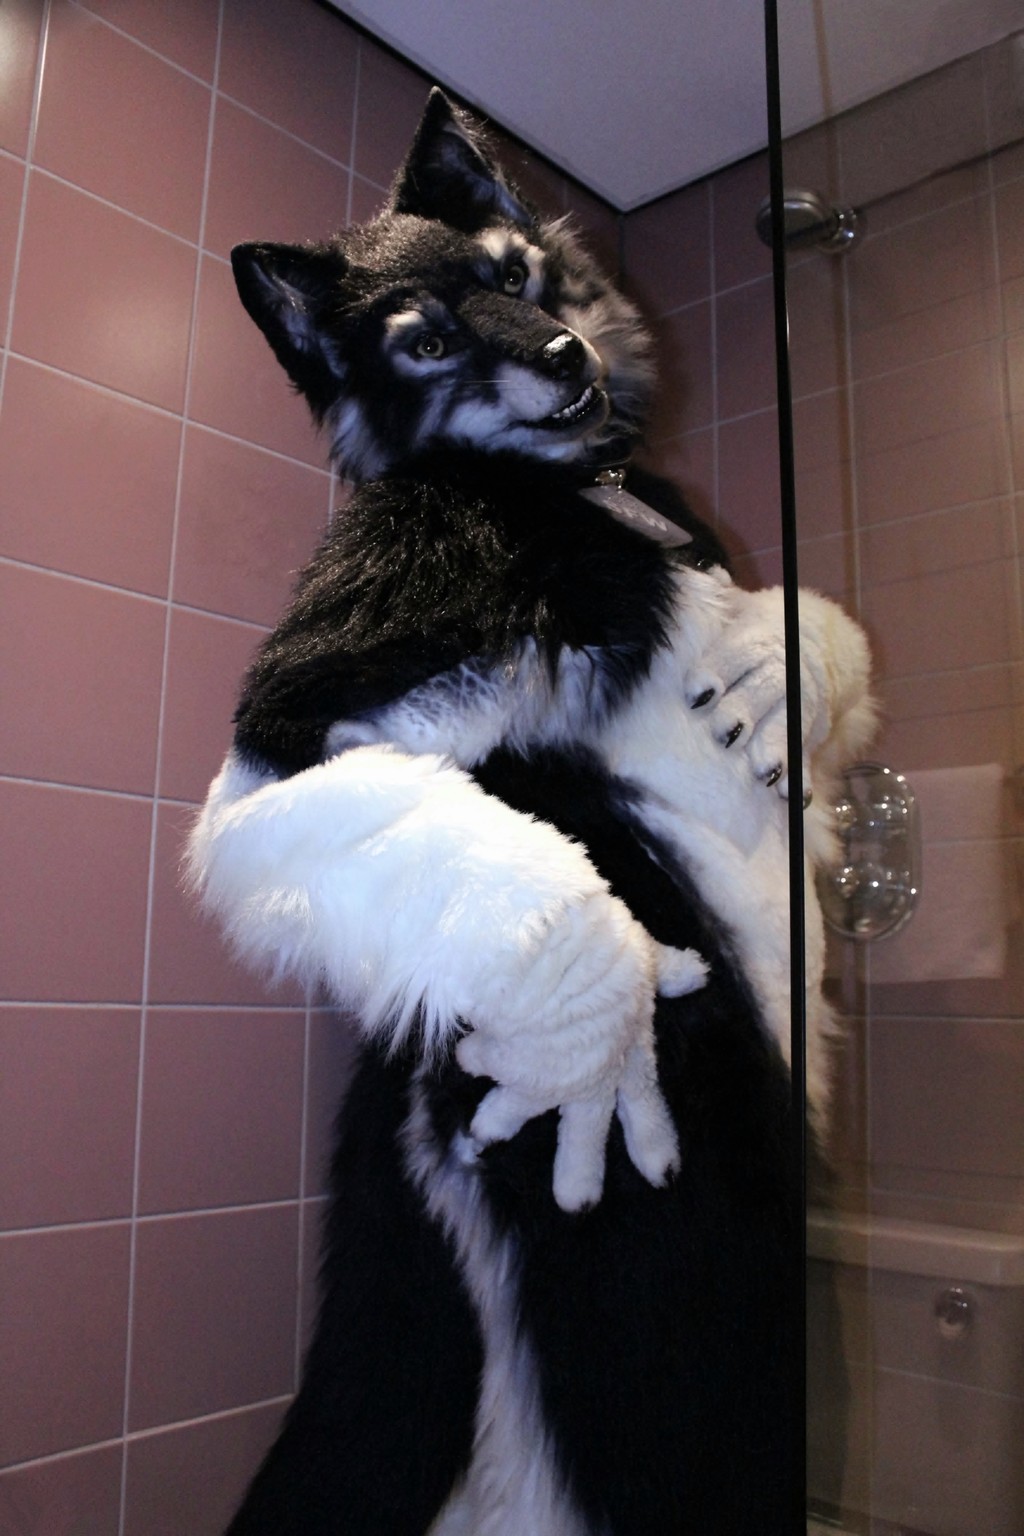 Most recent image: What? Can't a werewolf be clean?